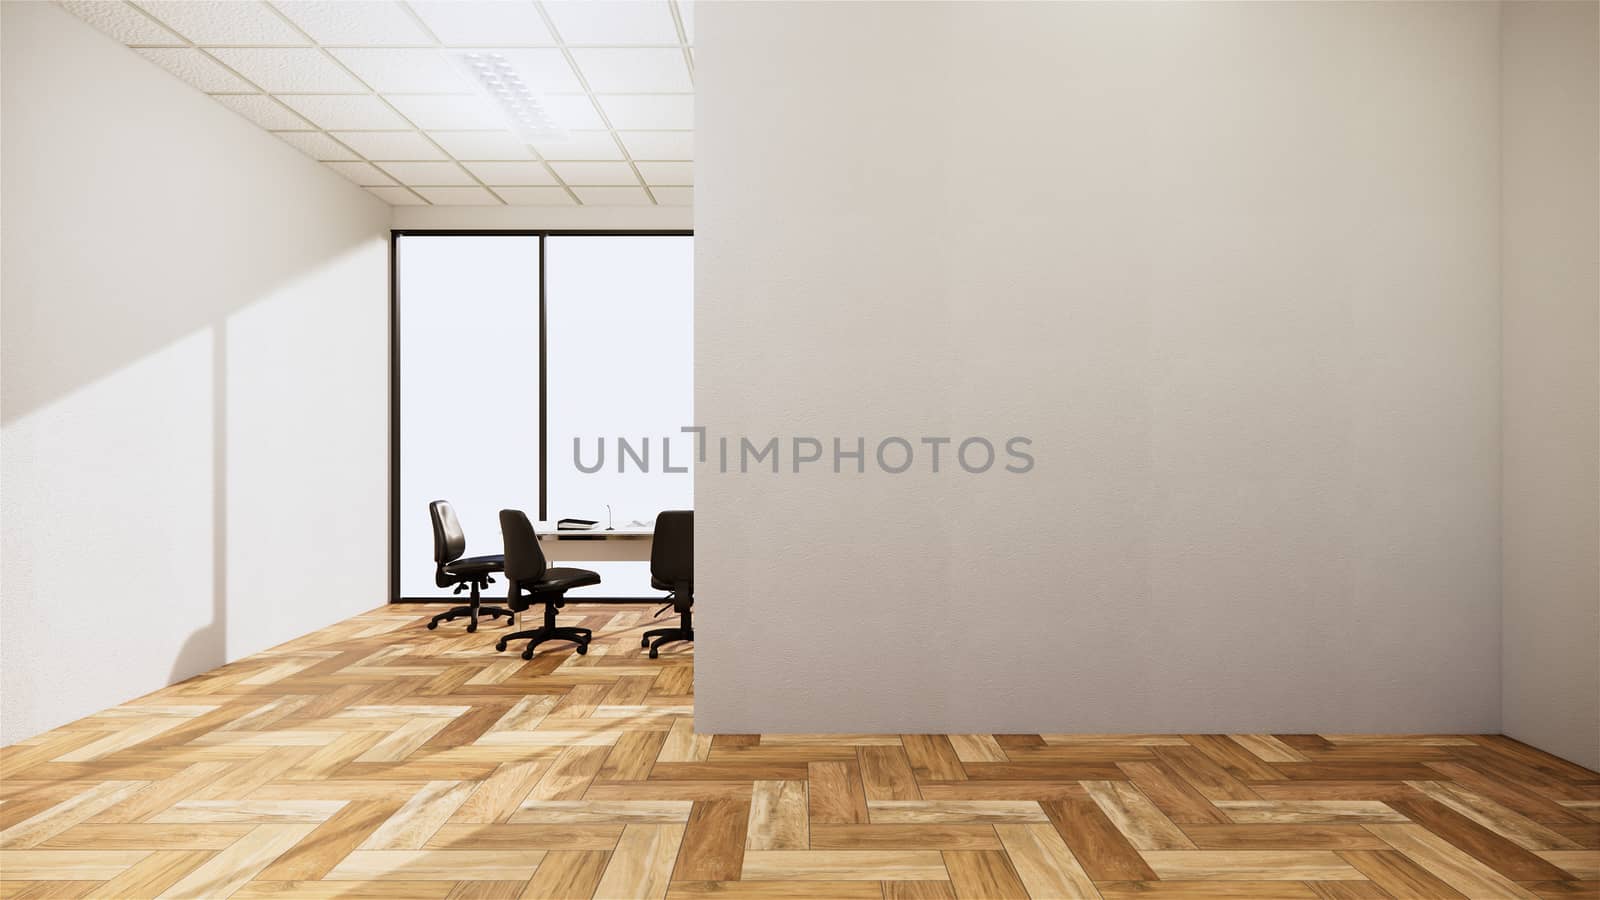 empty room interior with wooden floor on white wall background. 3D rendering